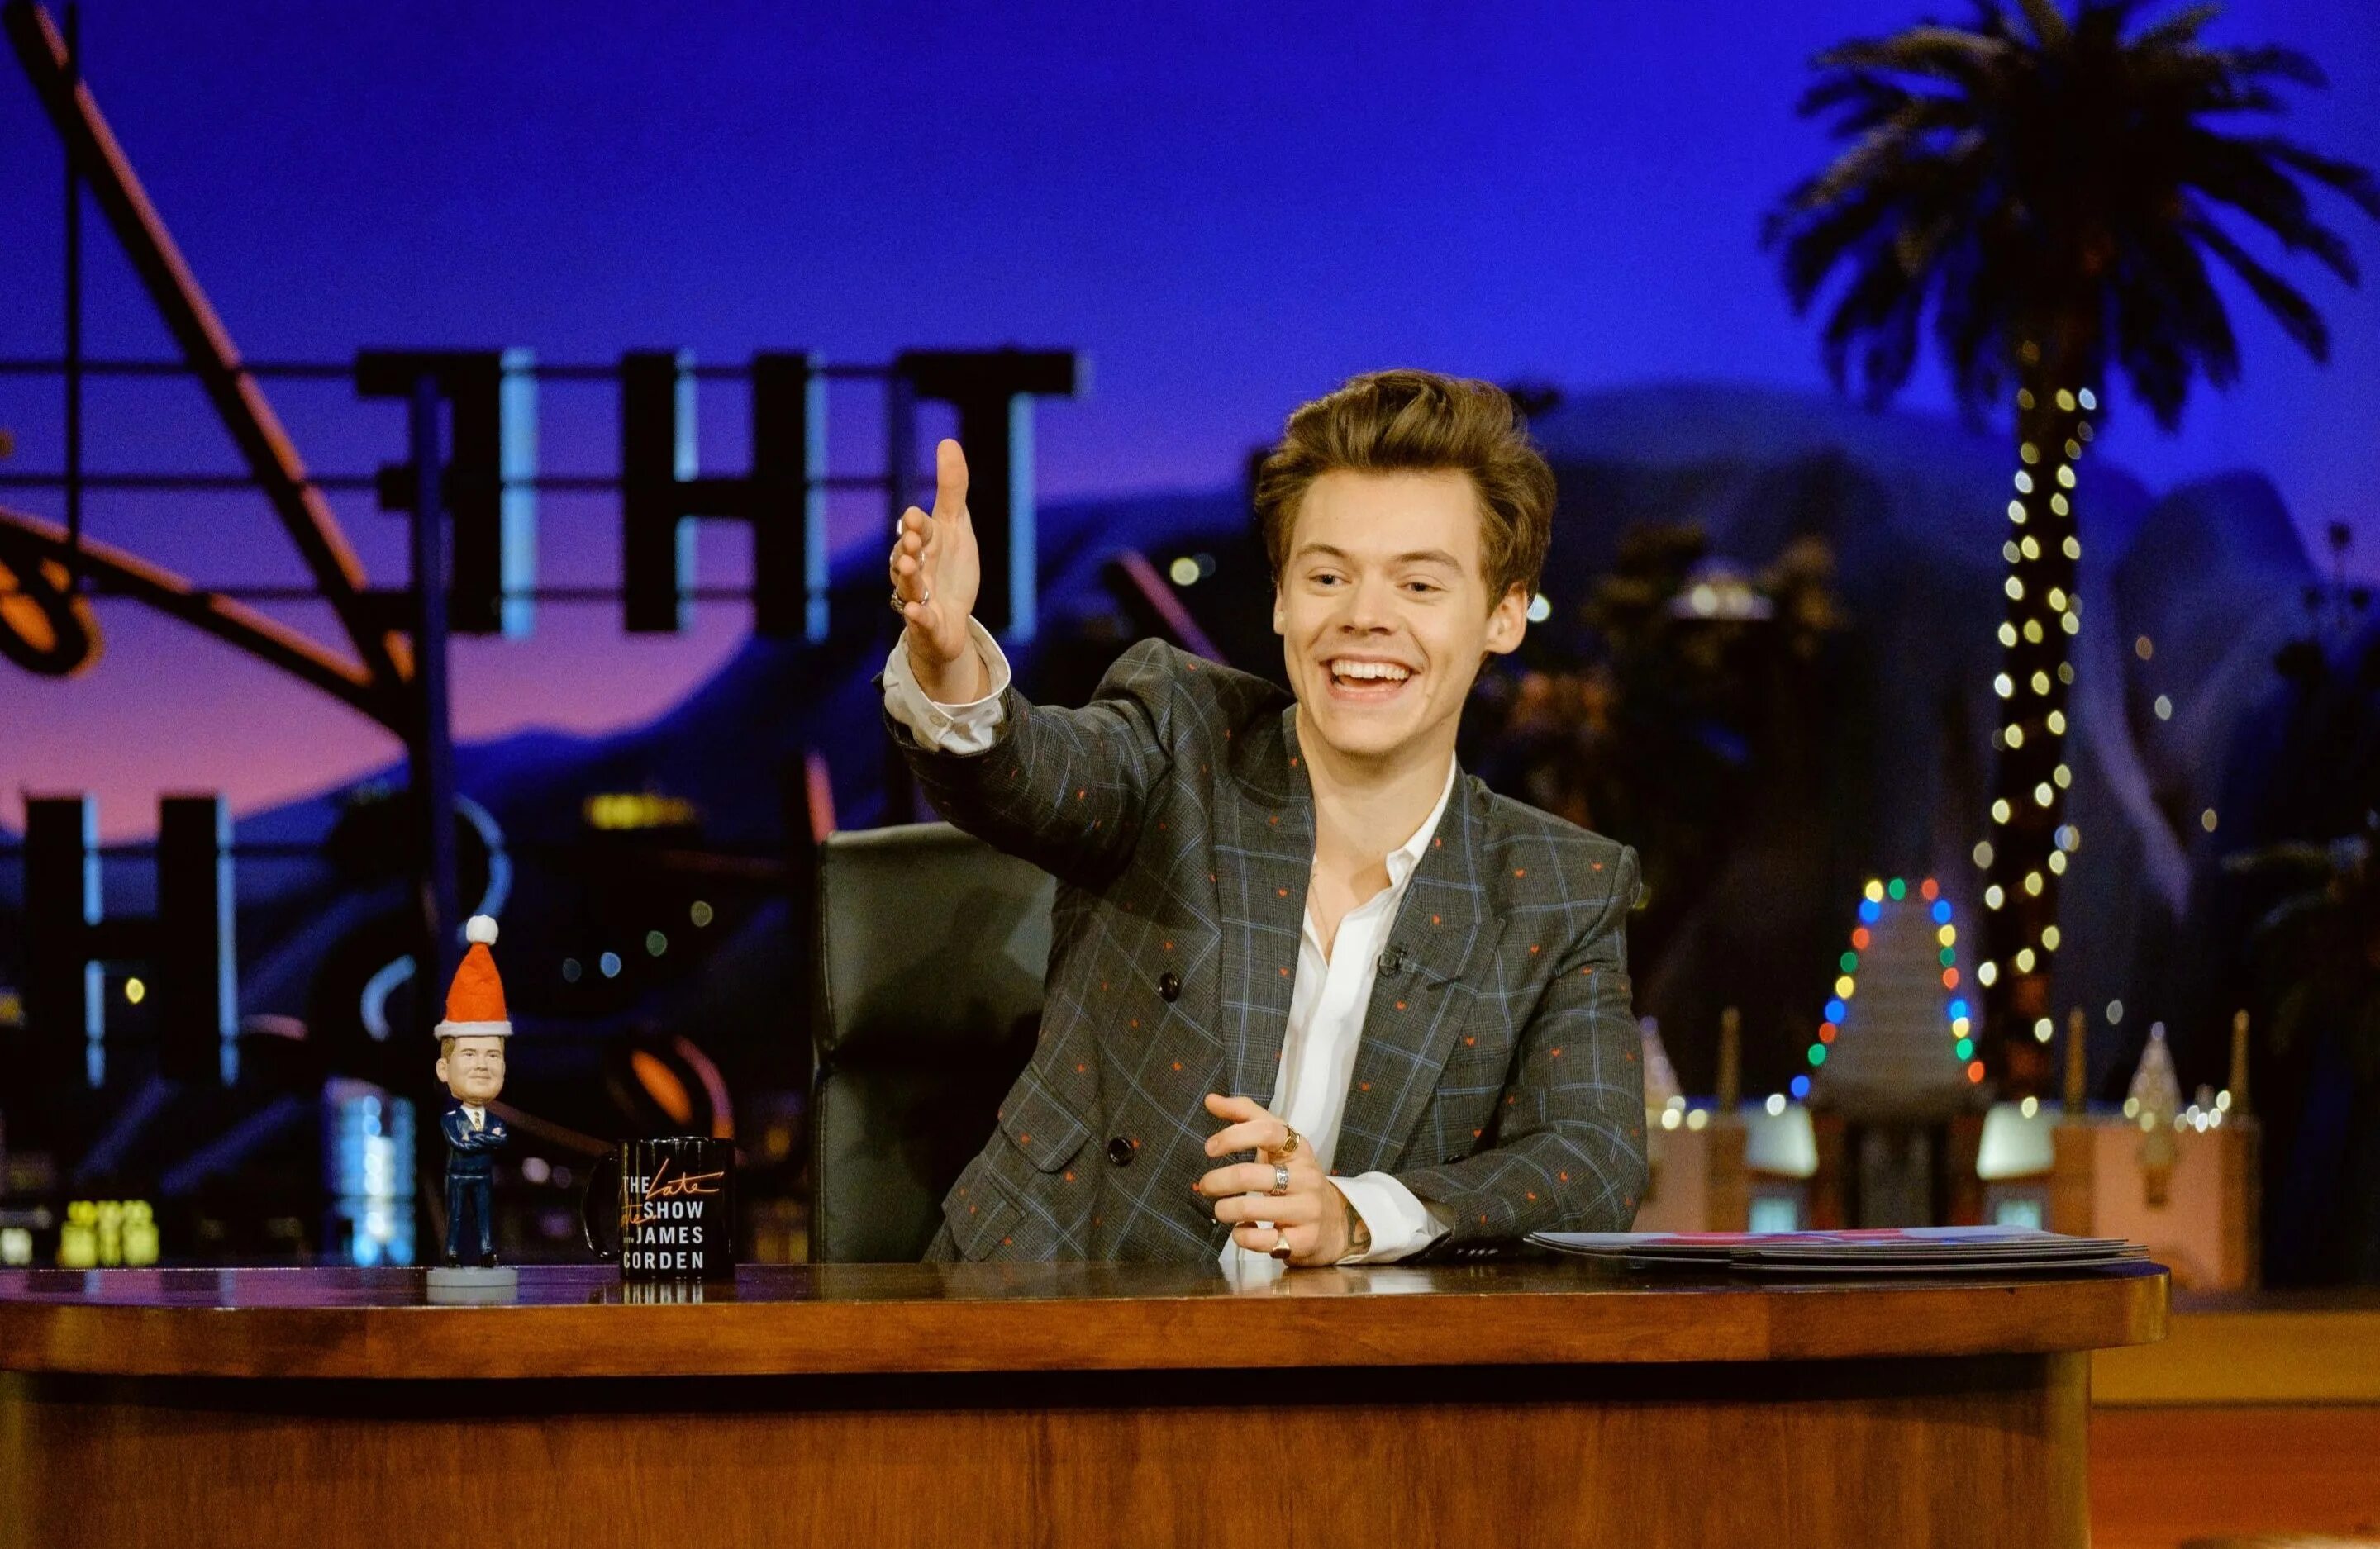 Harry Styles and James Corden. Harry Styles late late show. Shown james